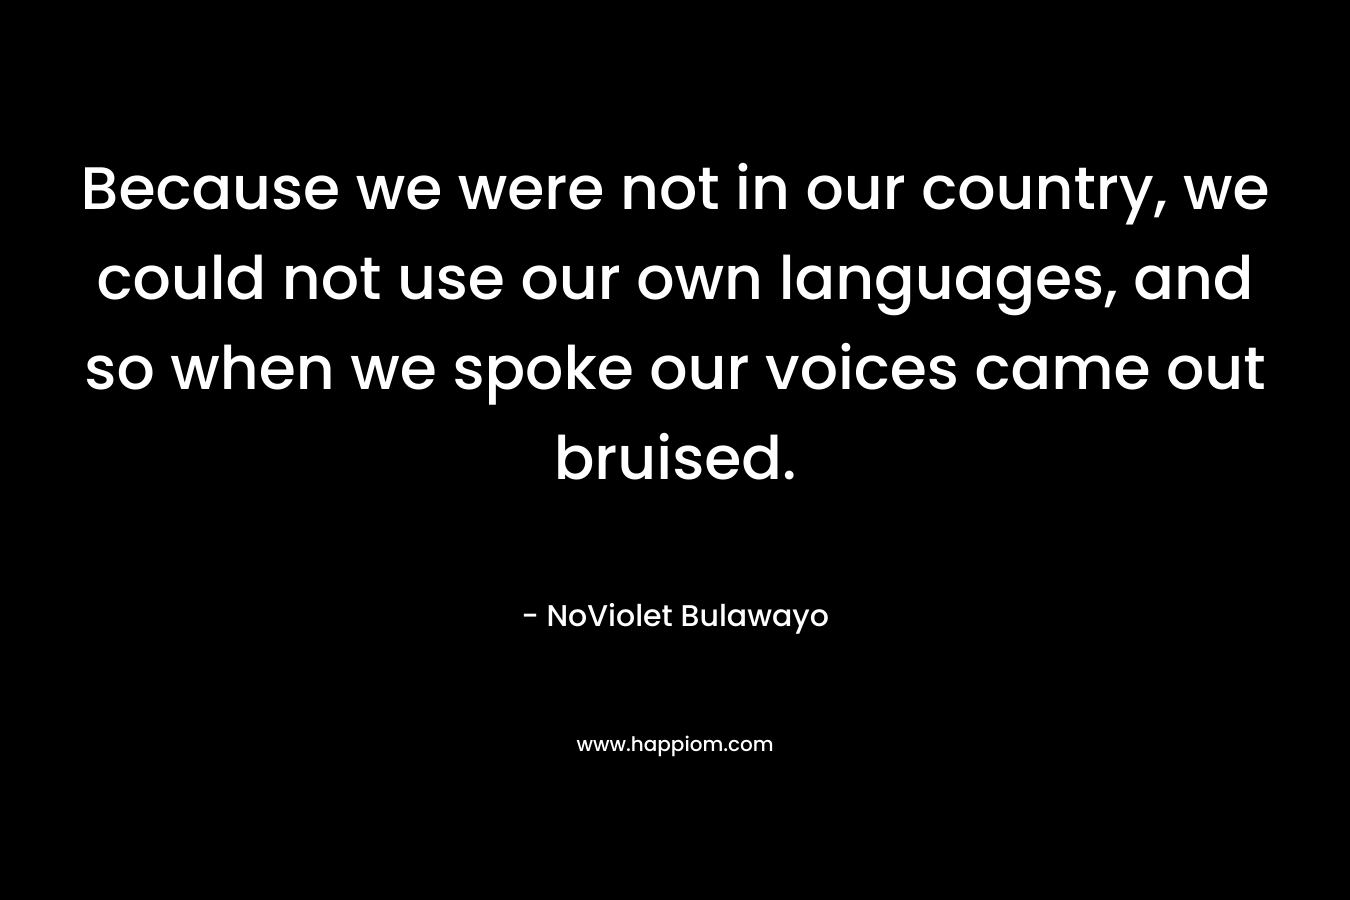 Because we were not in our country, we could not use our own languages, and so when we spoke our voices came out bruised.